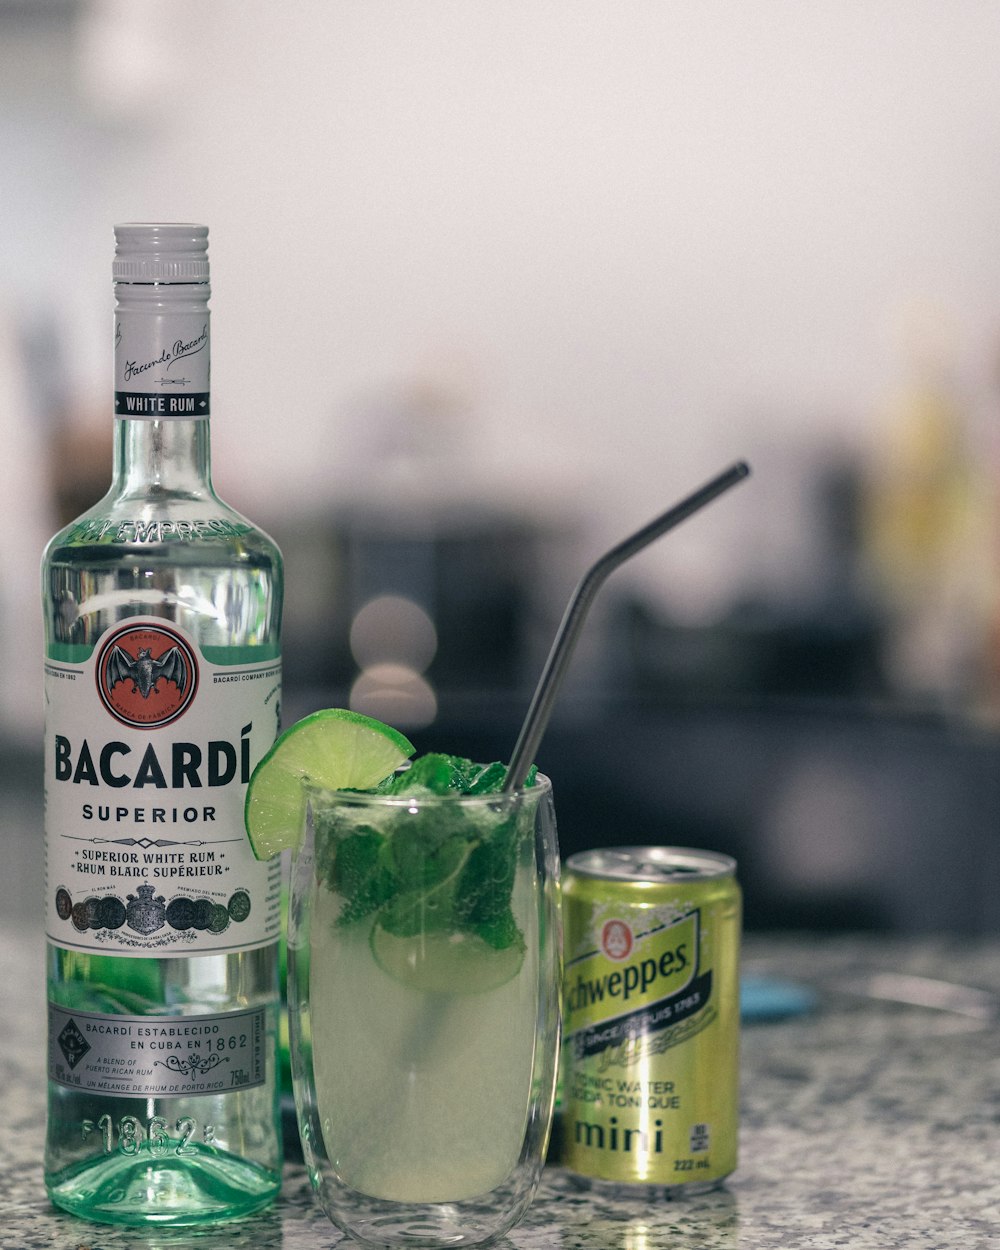 Bacardi superior bottle beside filled drinking glass and beer can